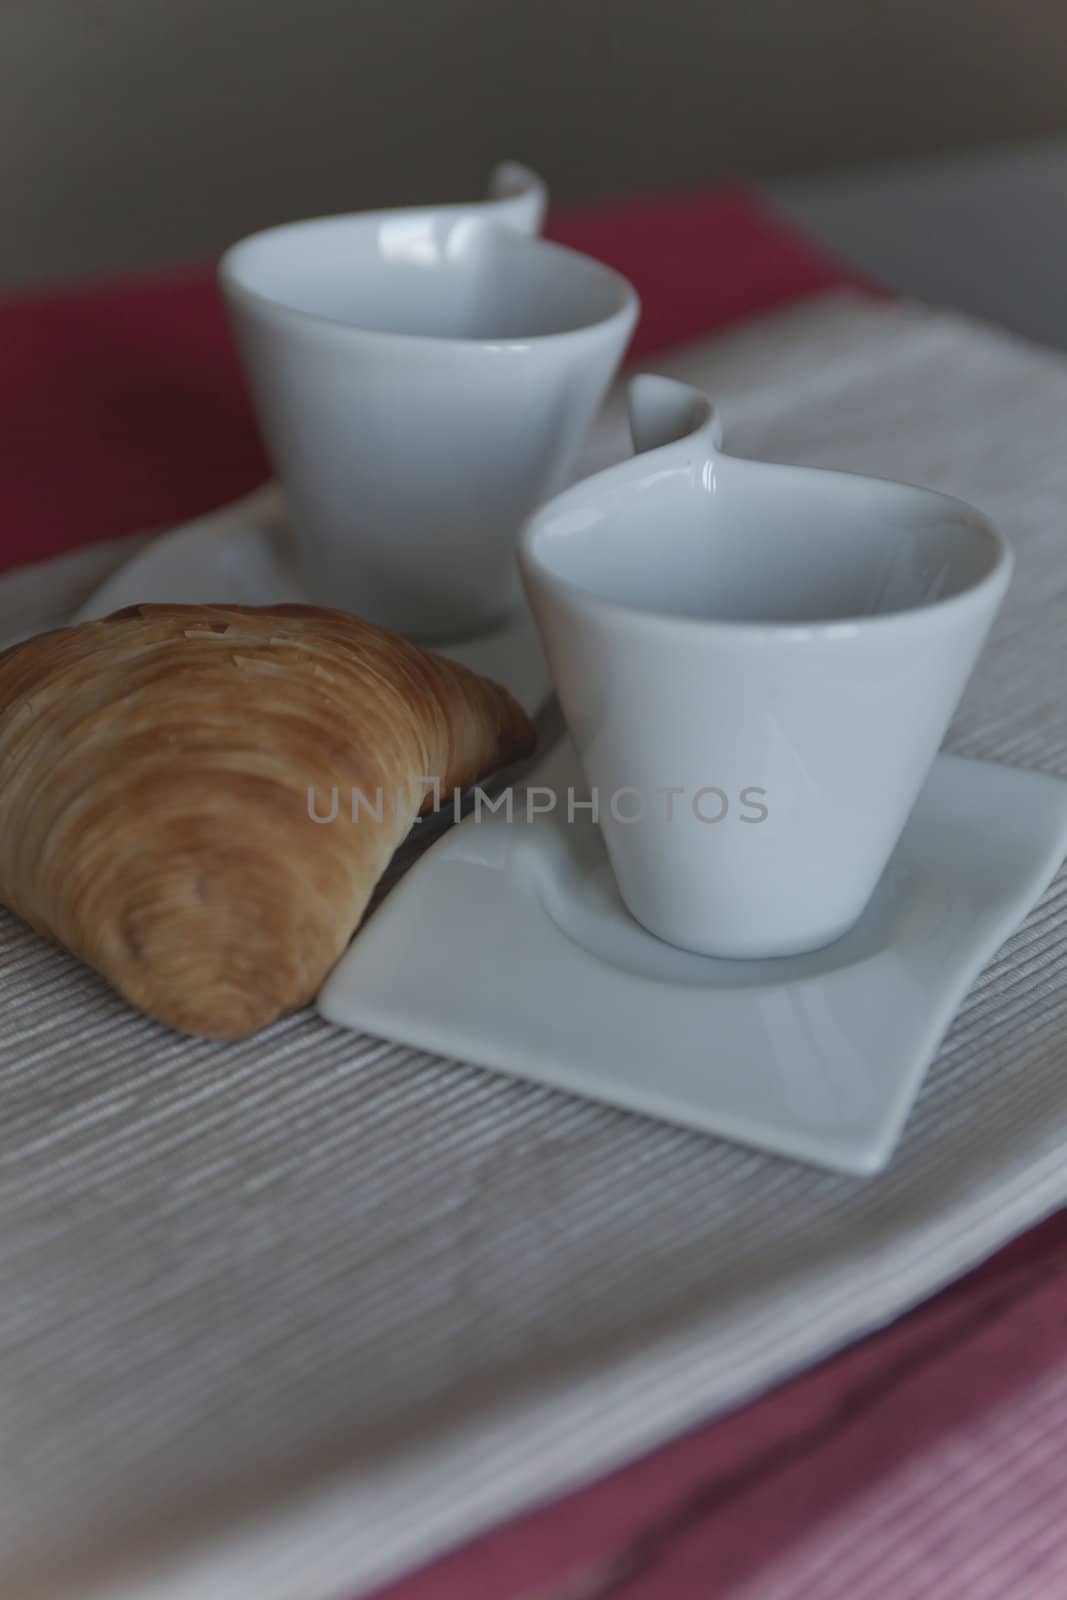 croissant and coffee cup at breakfast